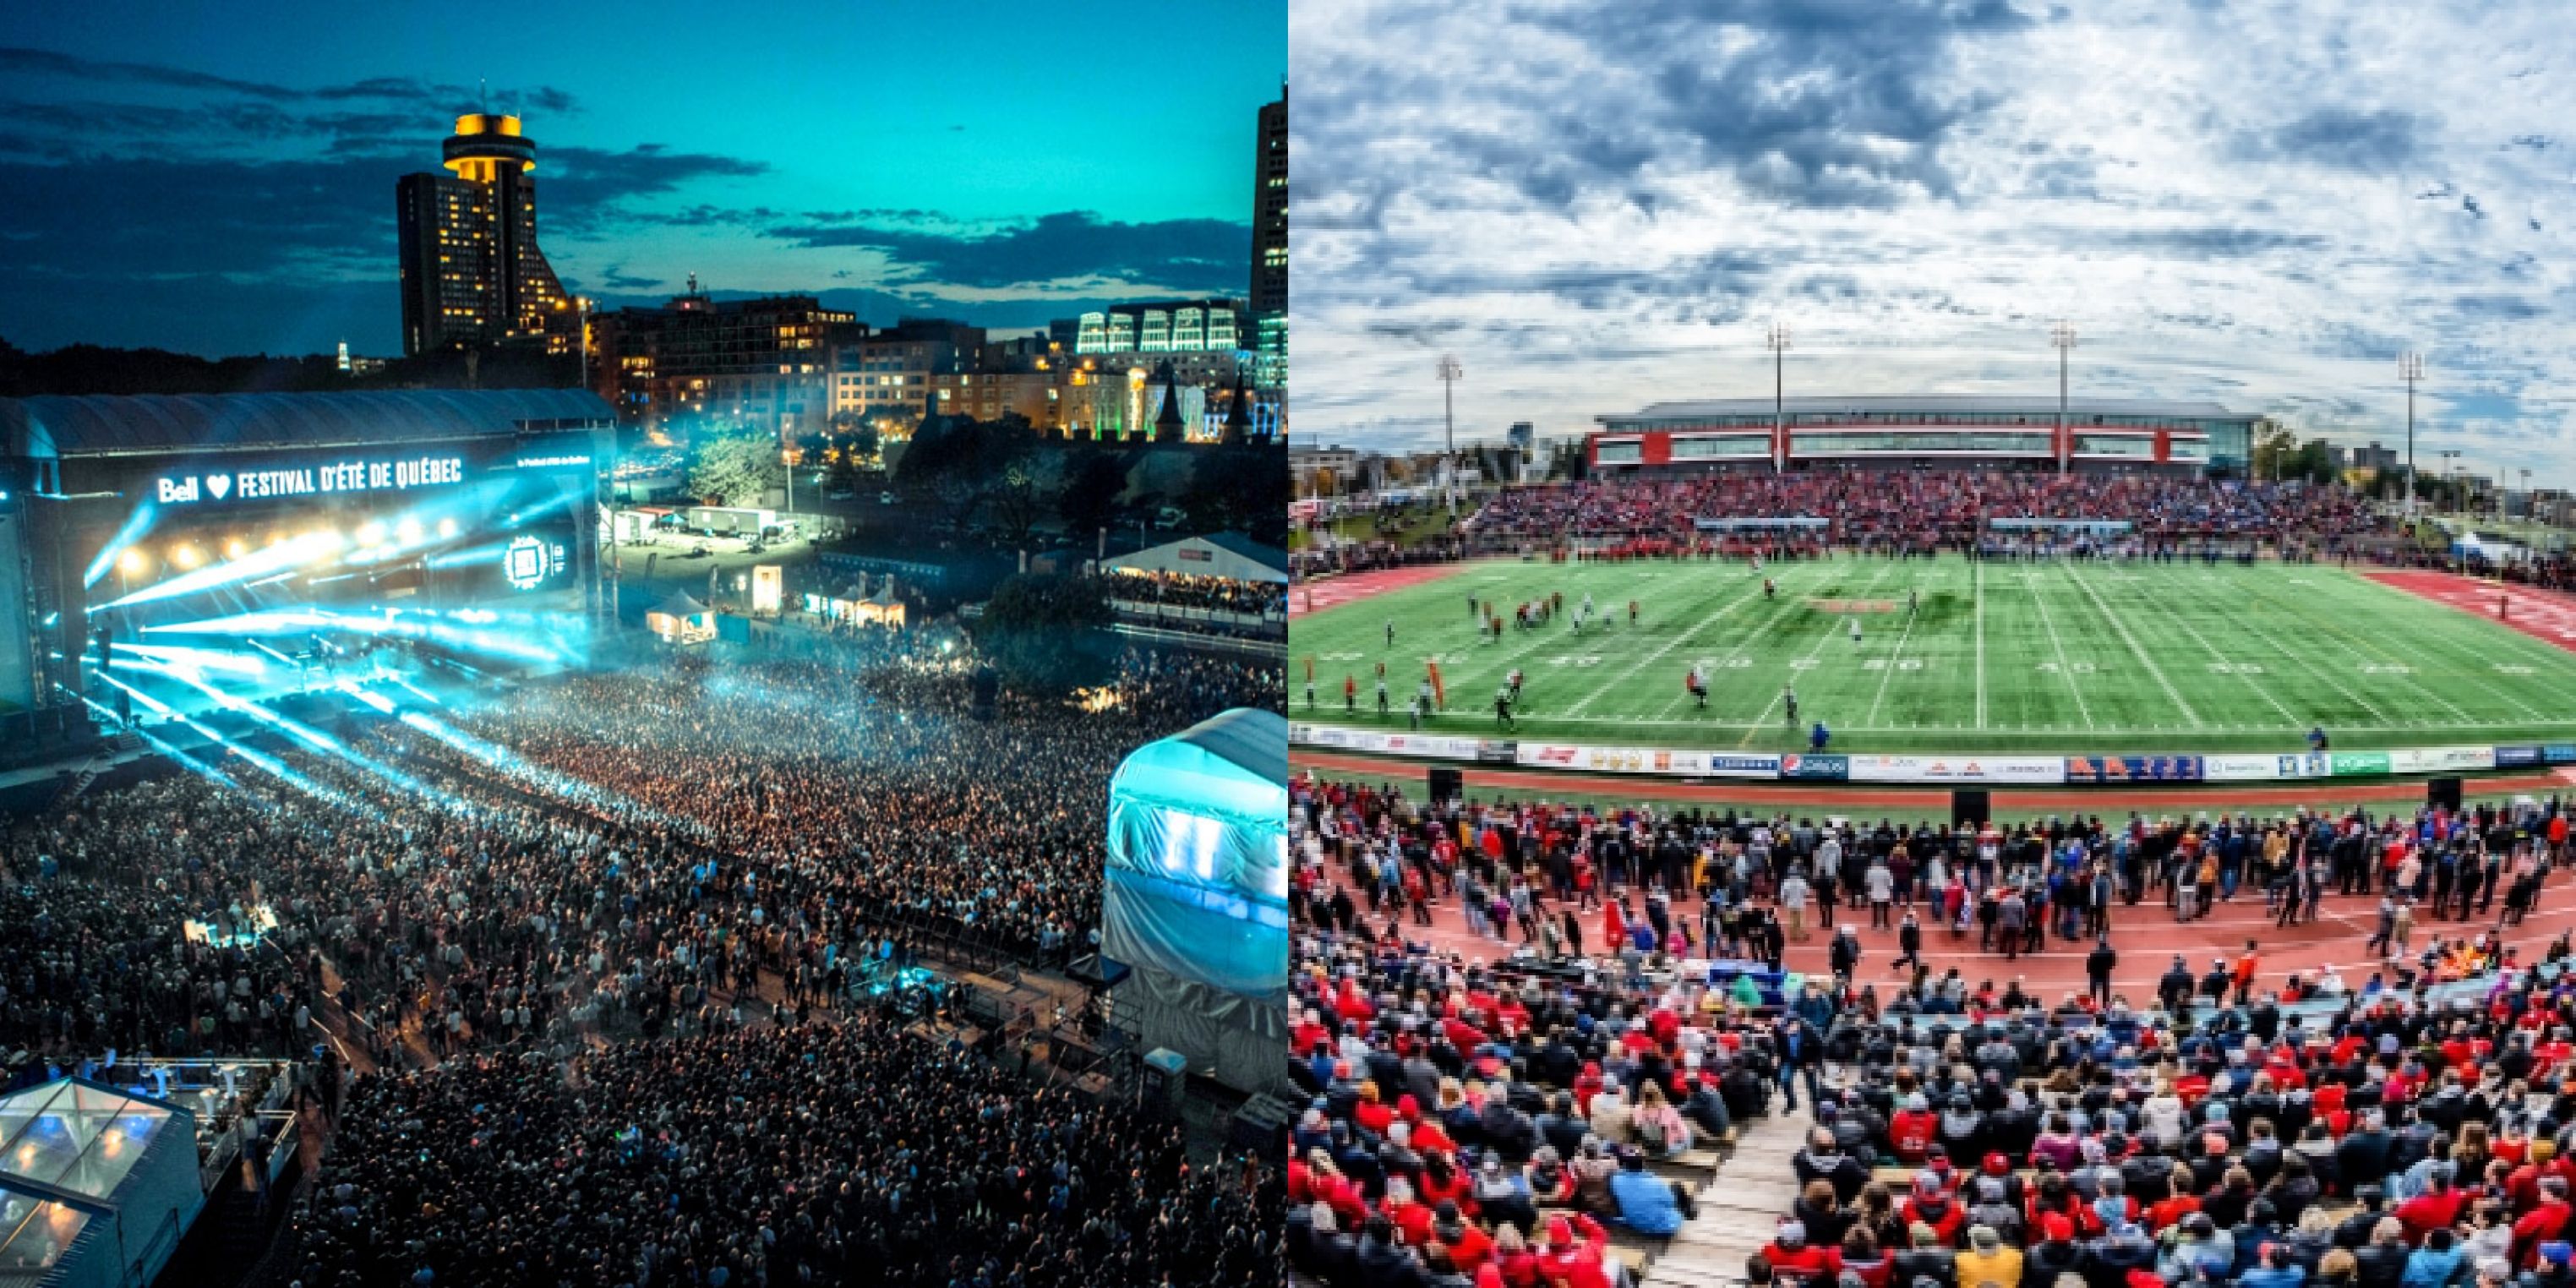 Images of the Summer Festival and a Rouge et Or football game